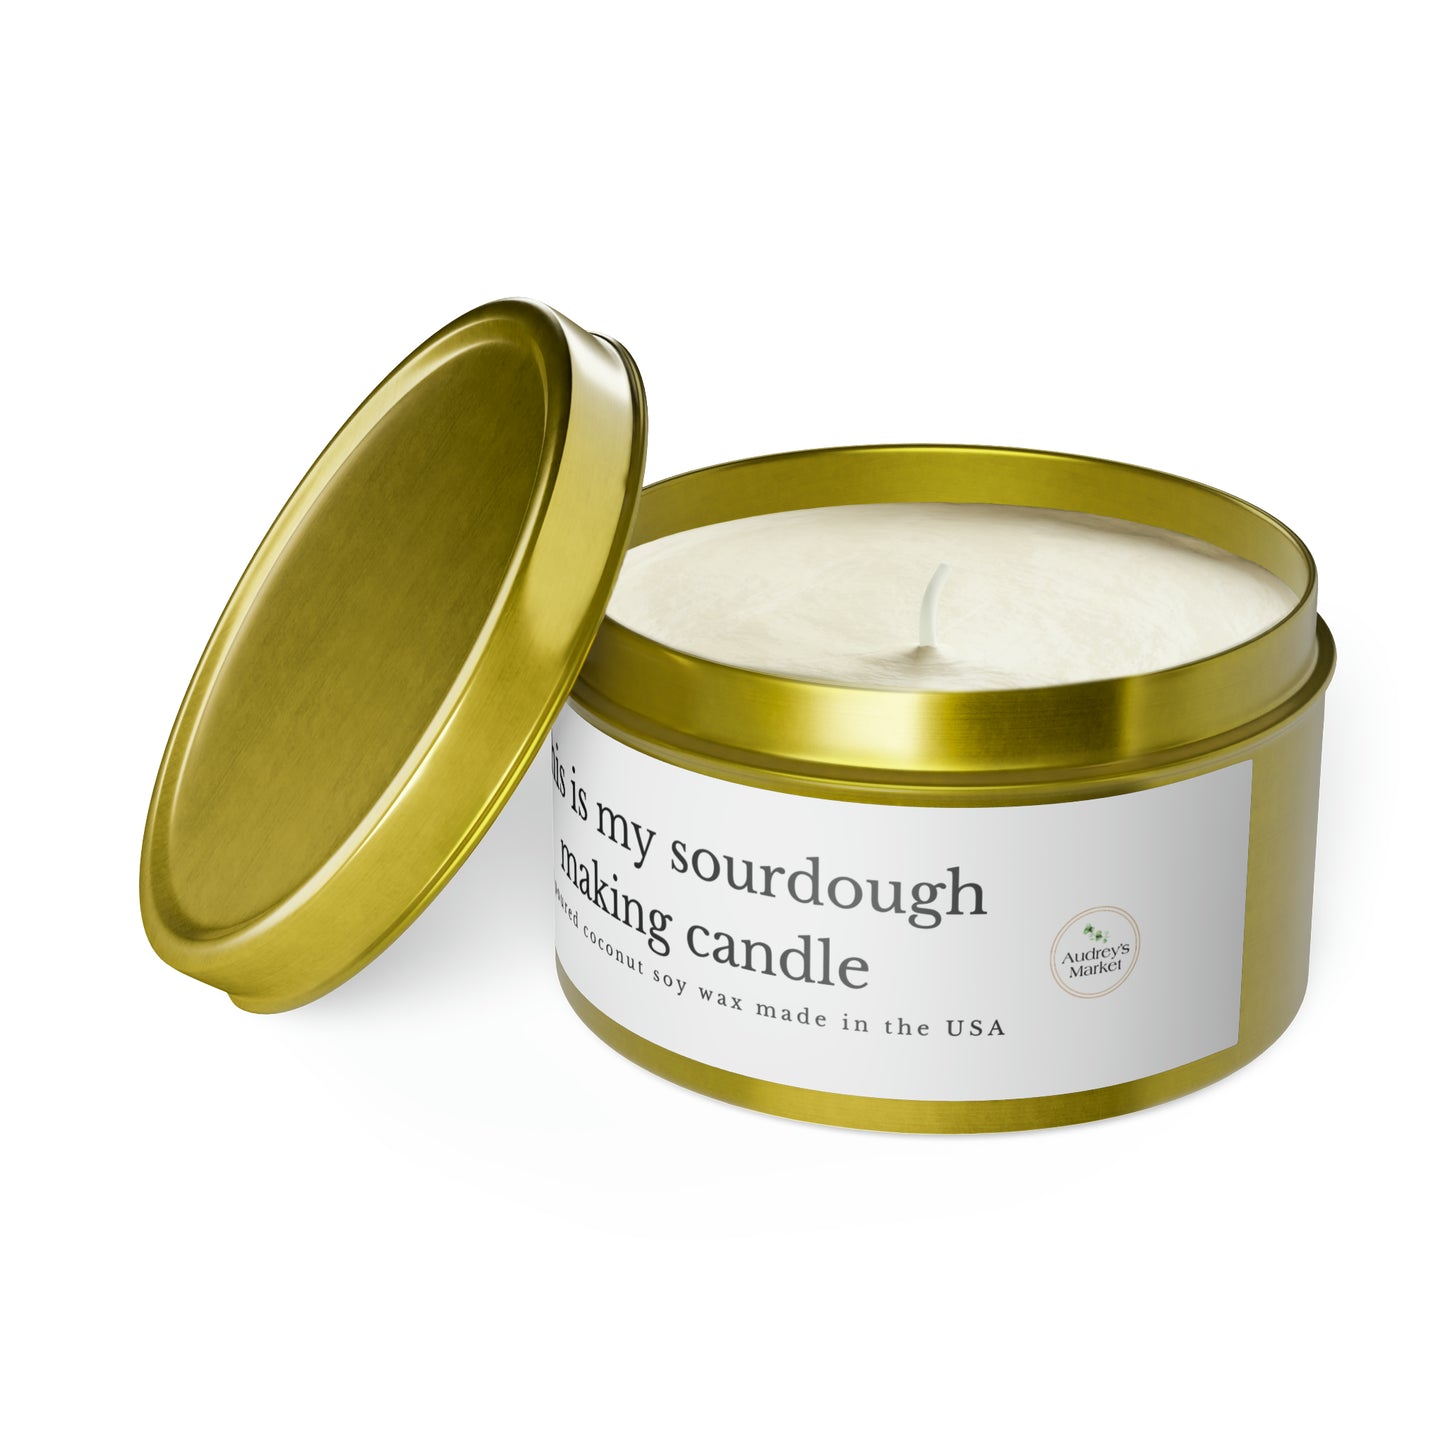 This Is My Sourdough Making Candle - Hand Poured in the USA, Available in 3 colors and 5 scents!